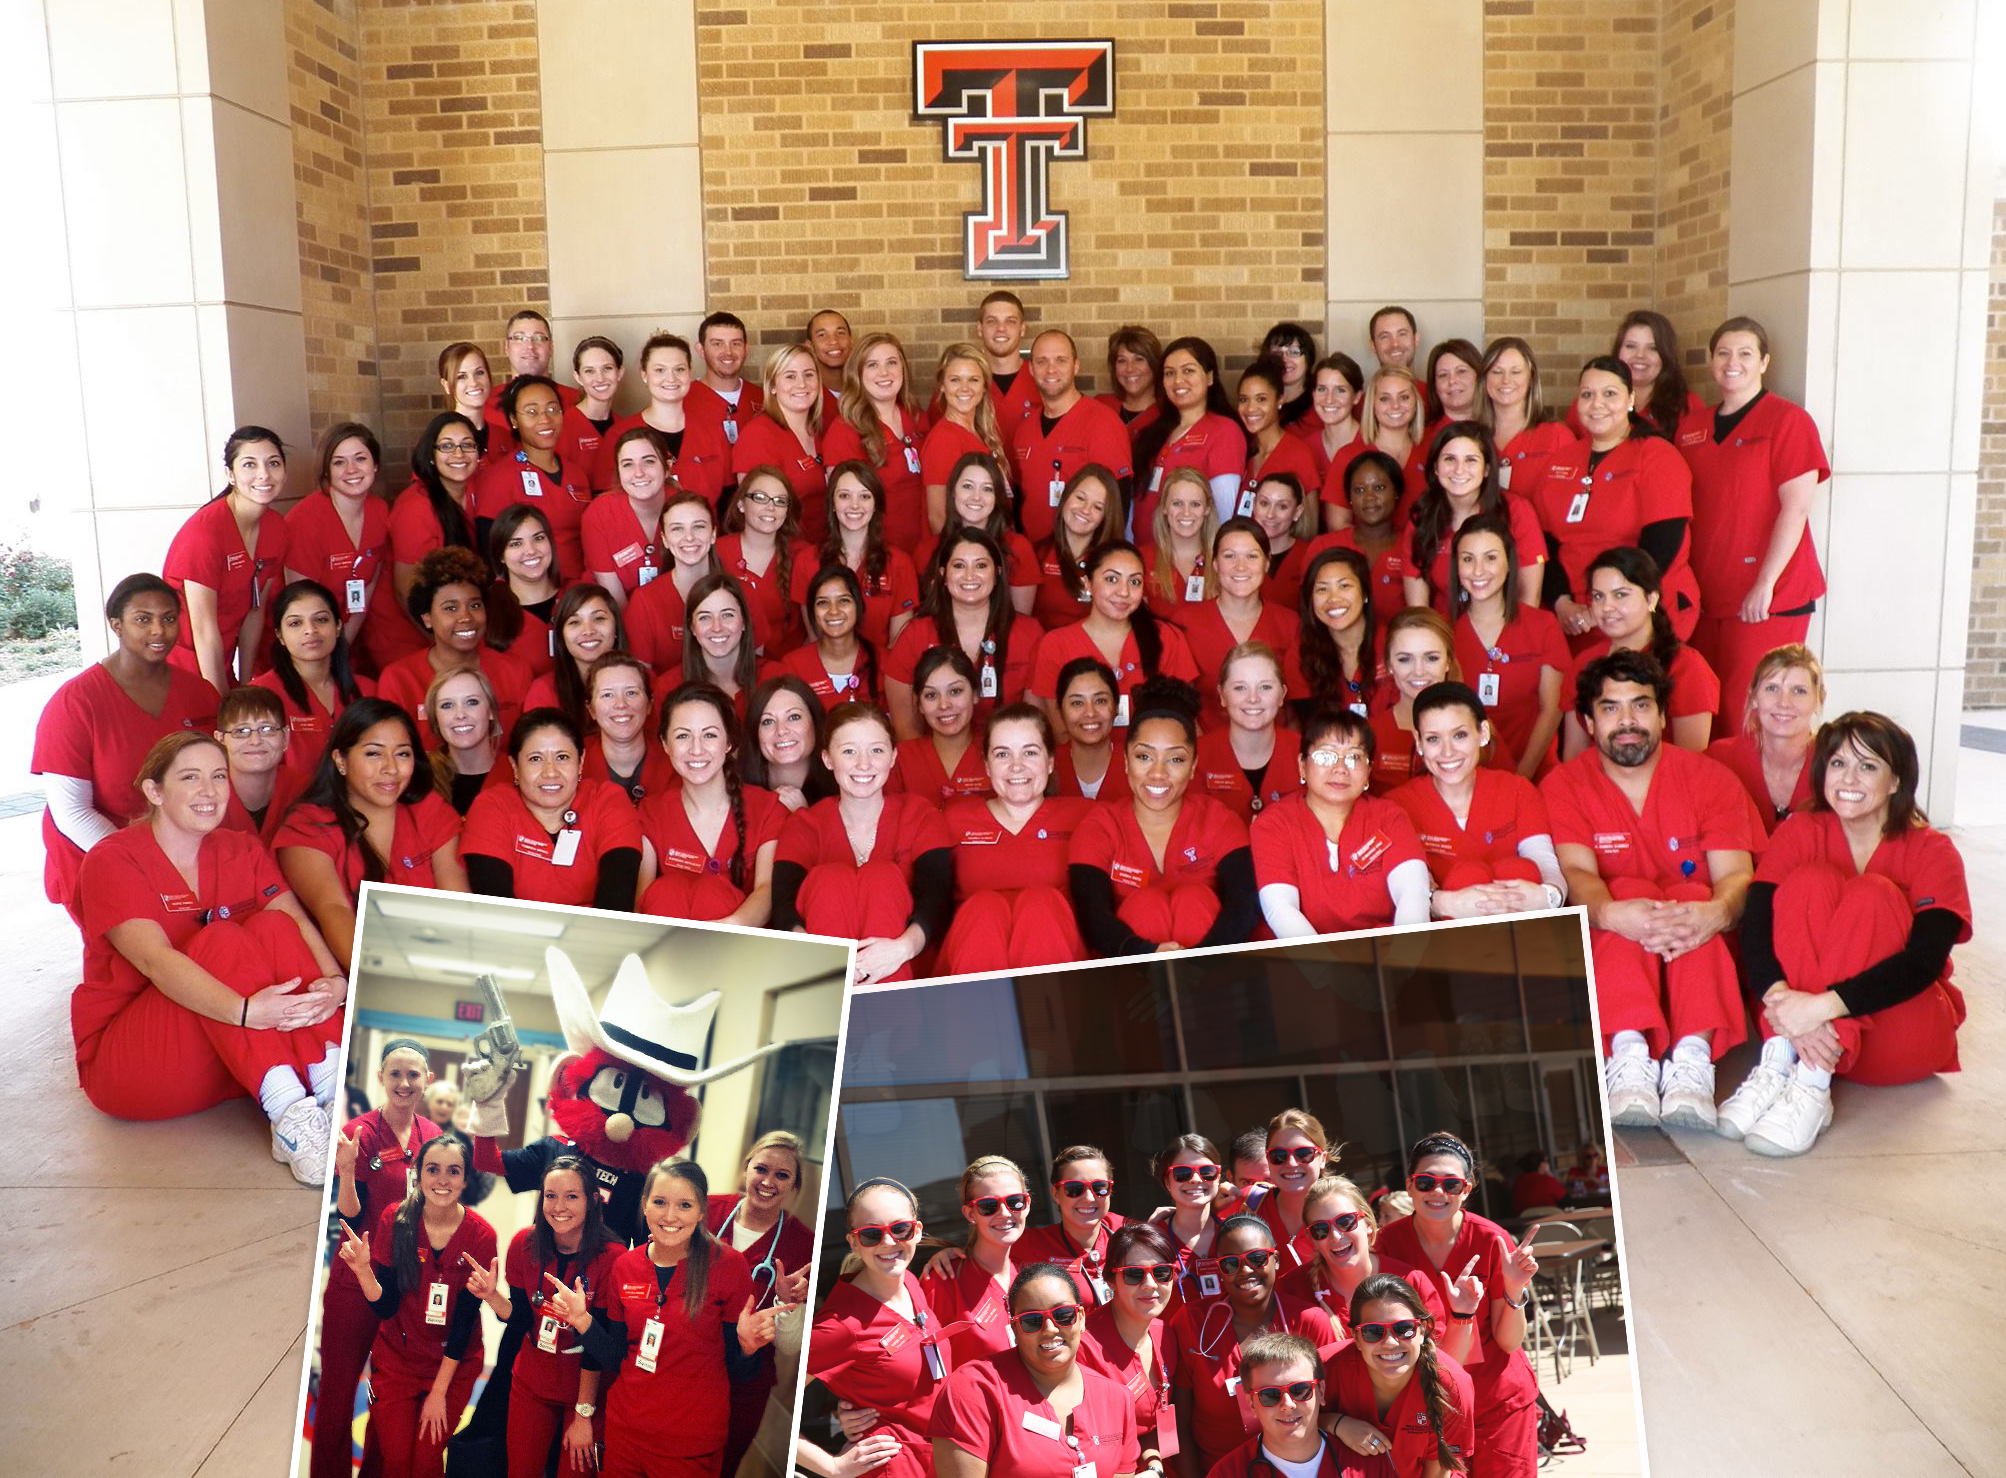 TTUHSC School of Nursing Office of Admissions and Student Affairs with Raider Red!